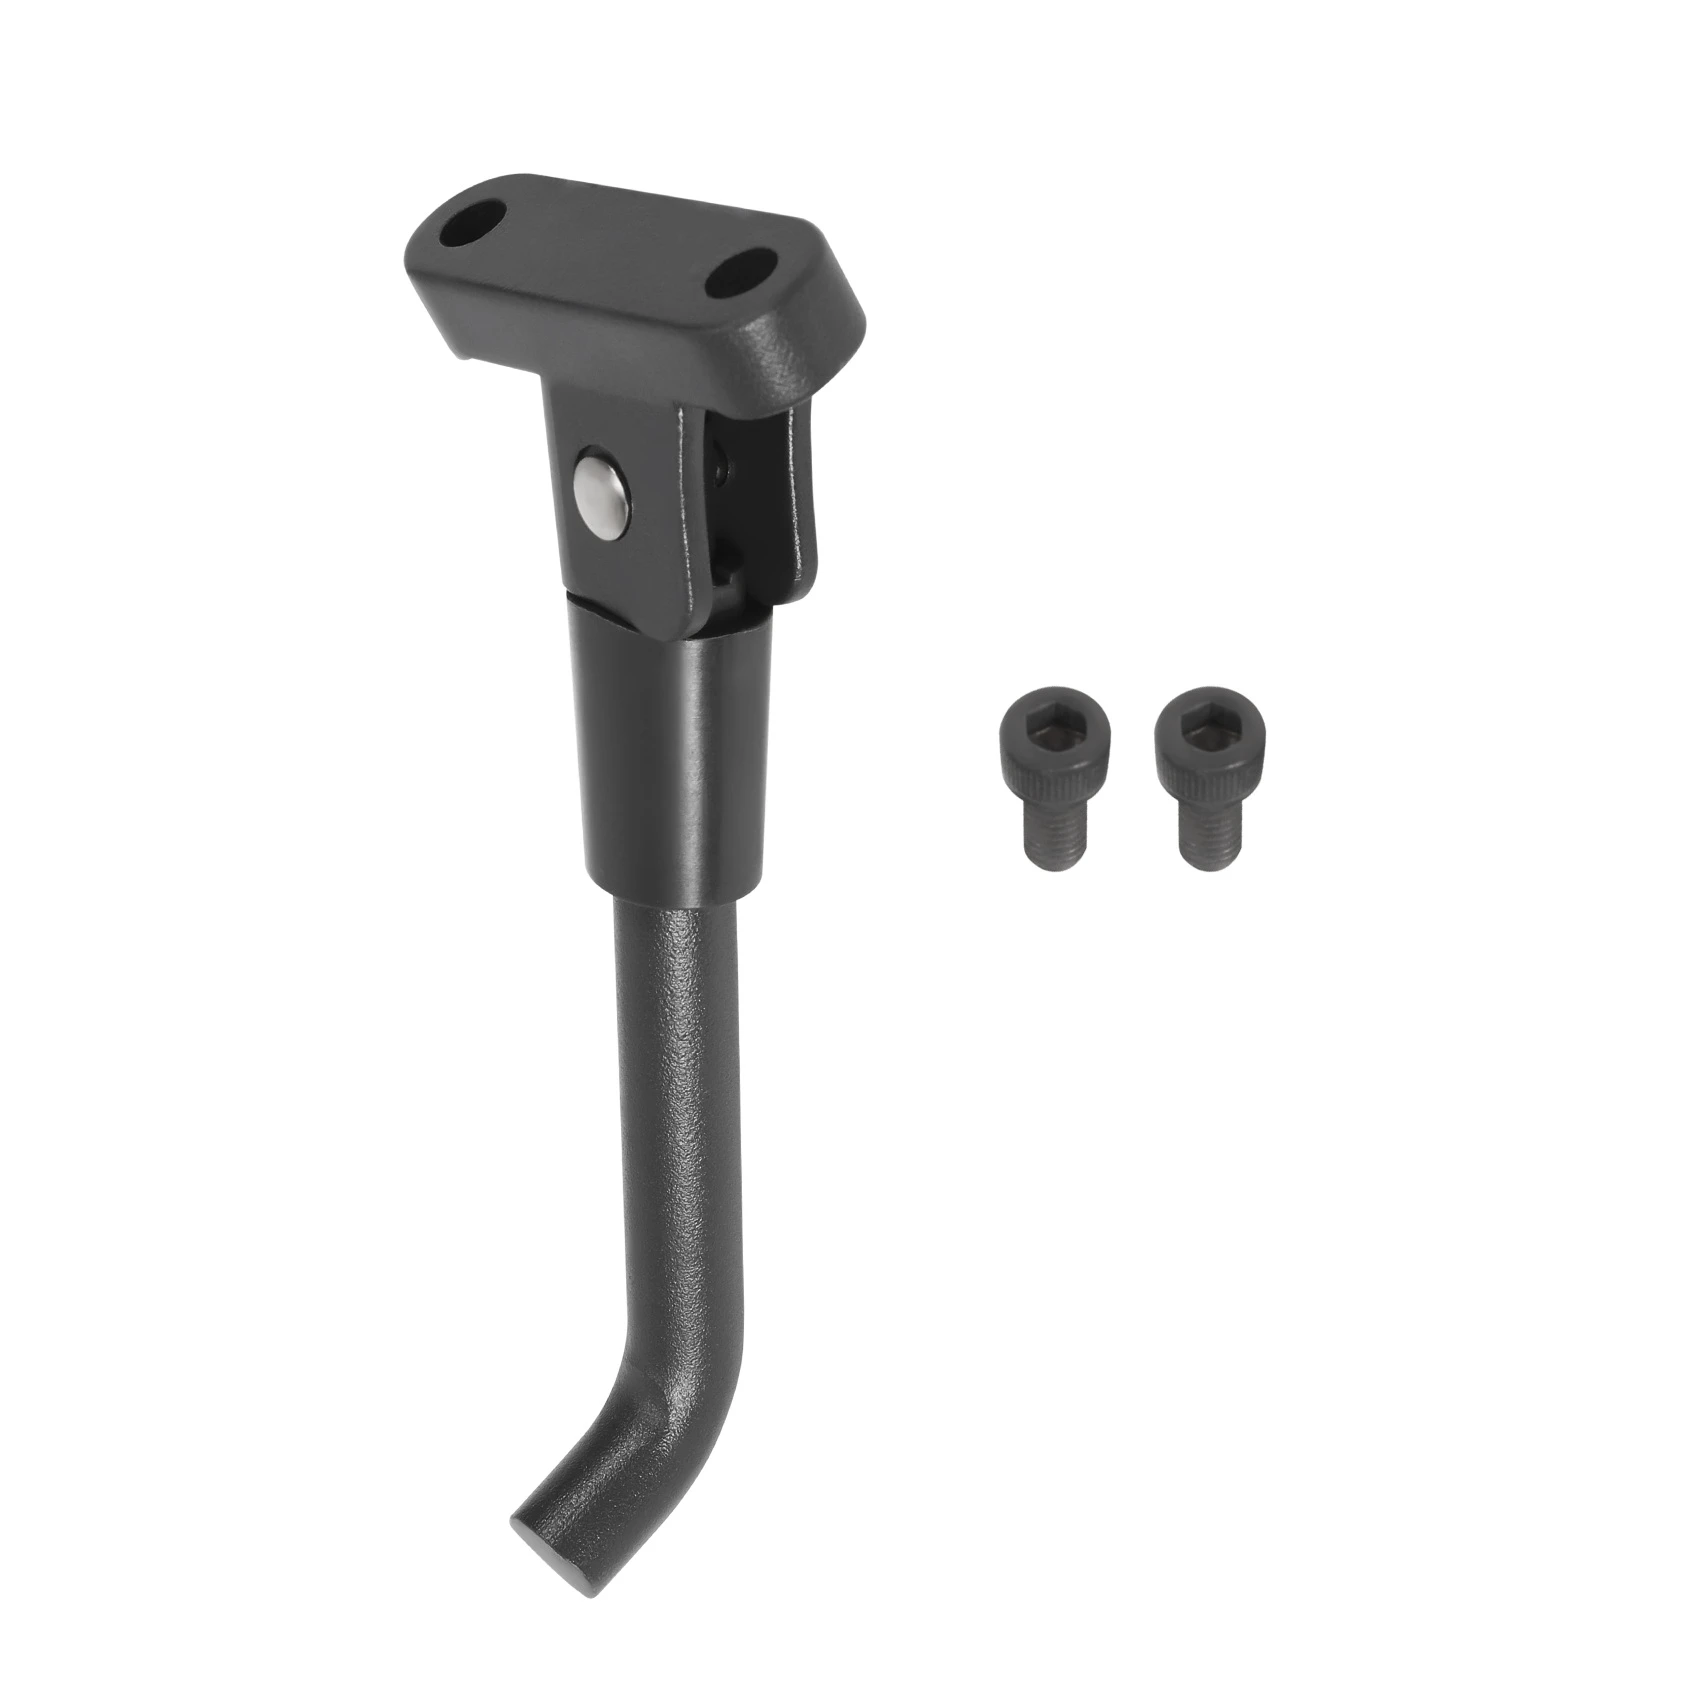 

Scooter Parking Stand Kickstand For Xiaomi Mijia M365 Electric Scooter Skateboard Accessories Tripod BLACK